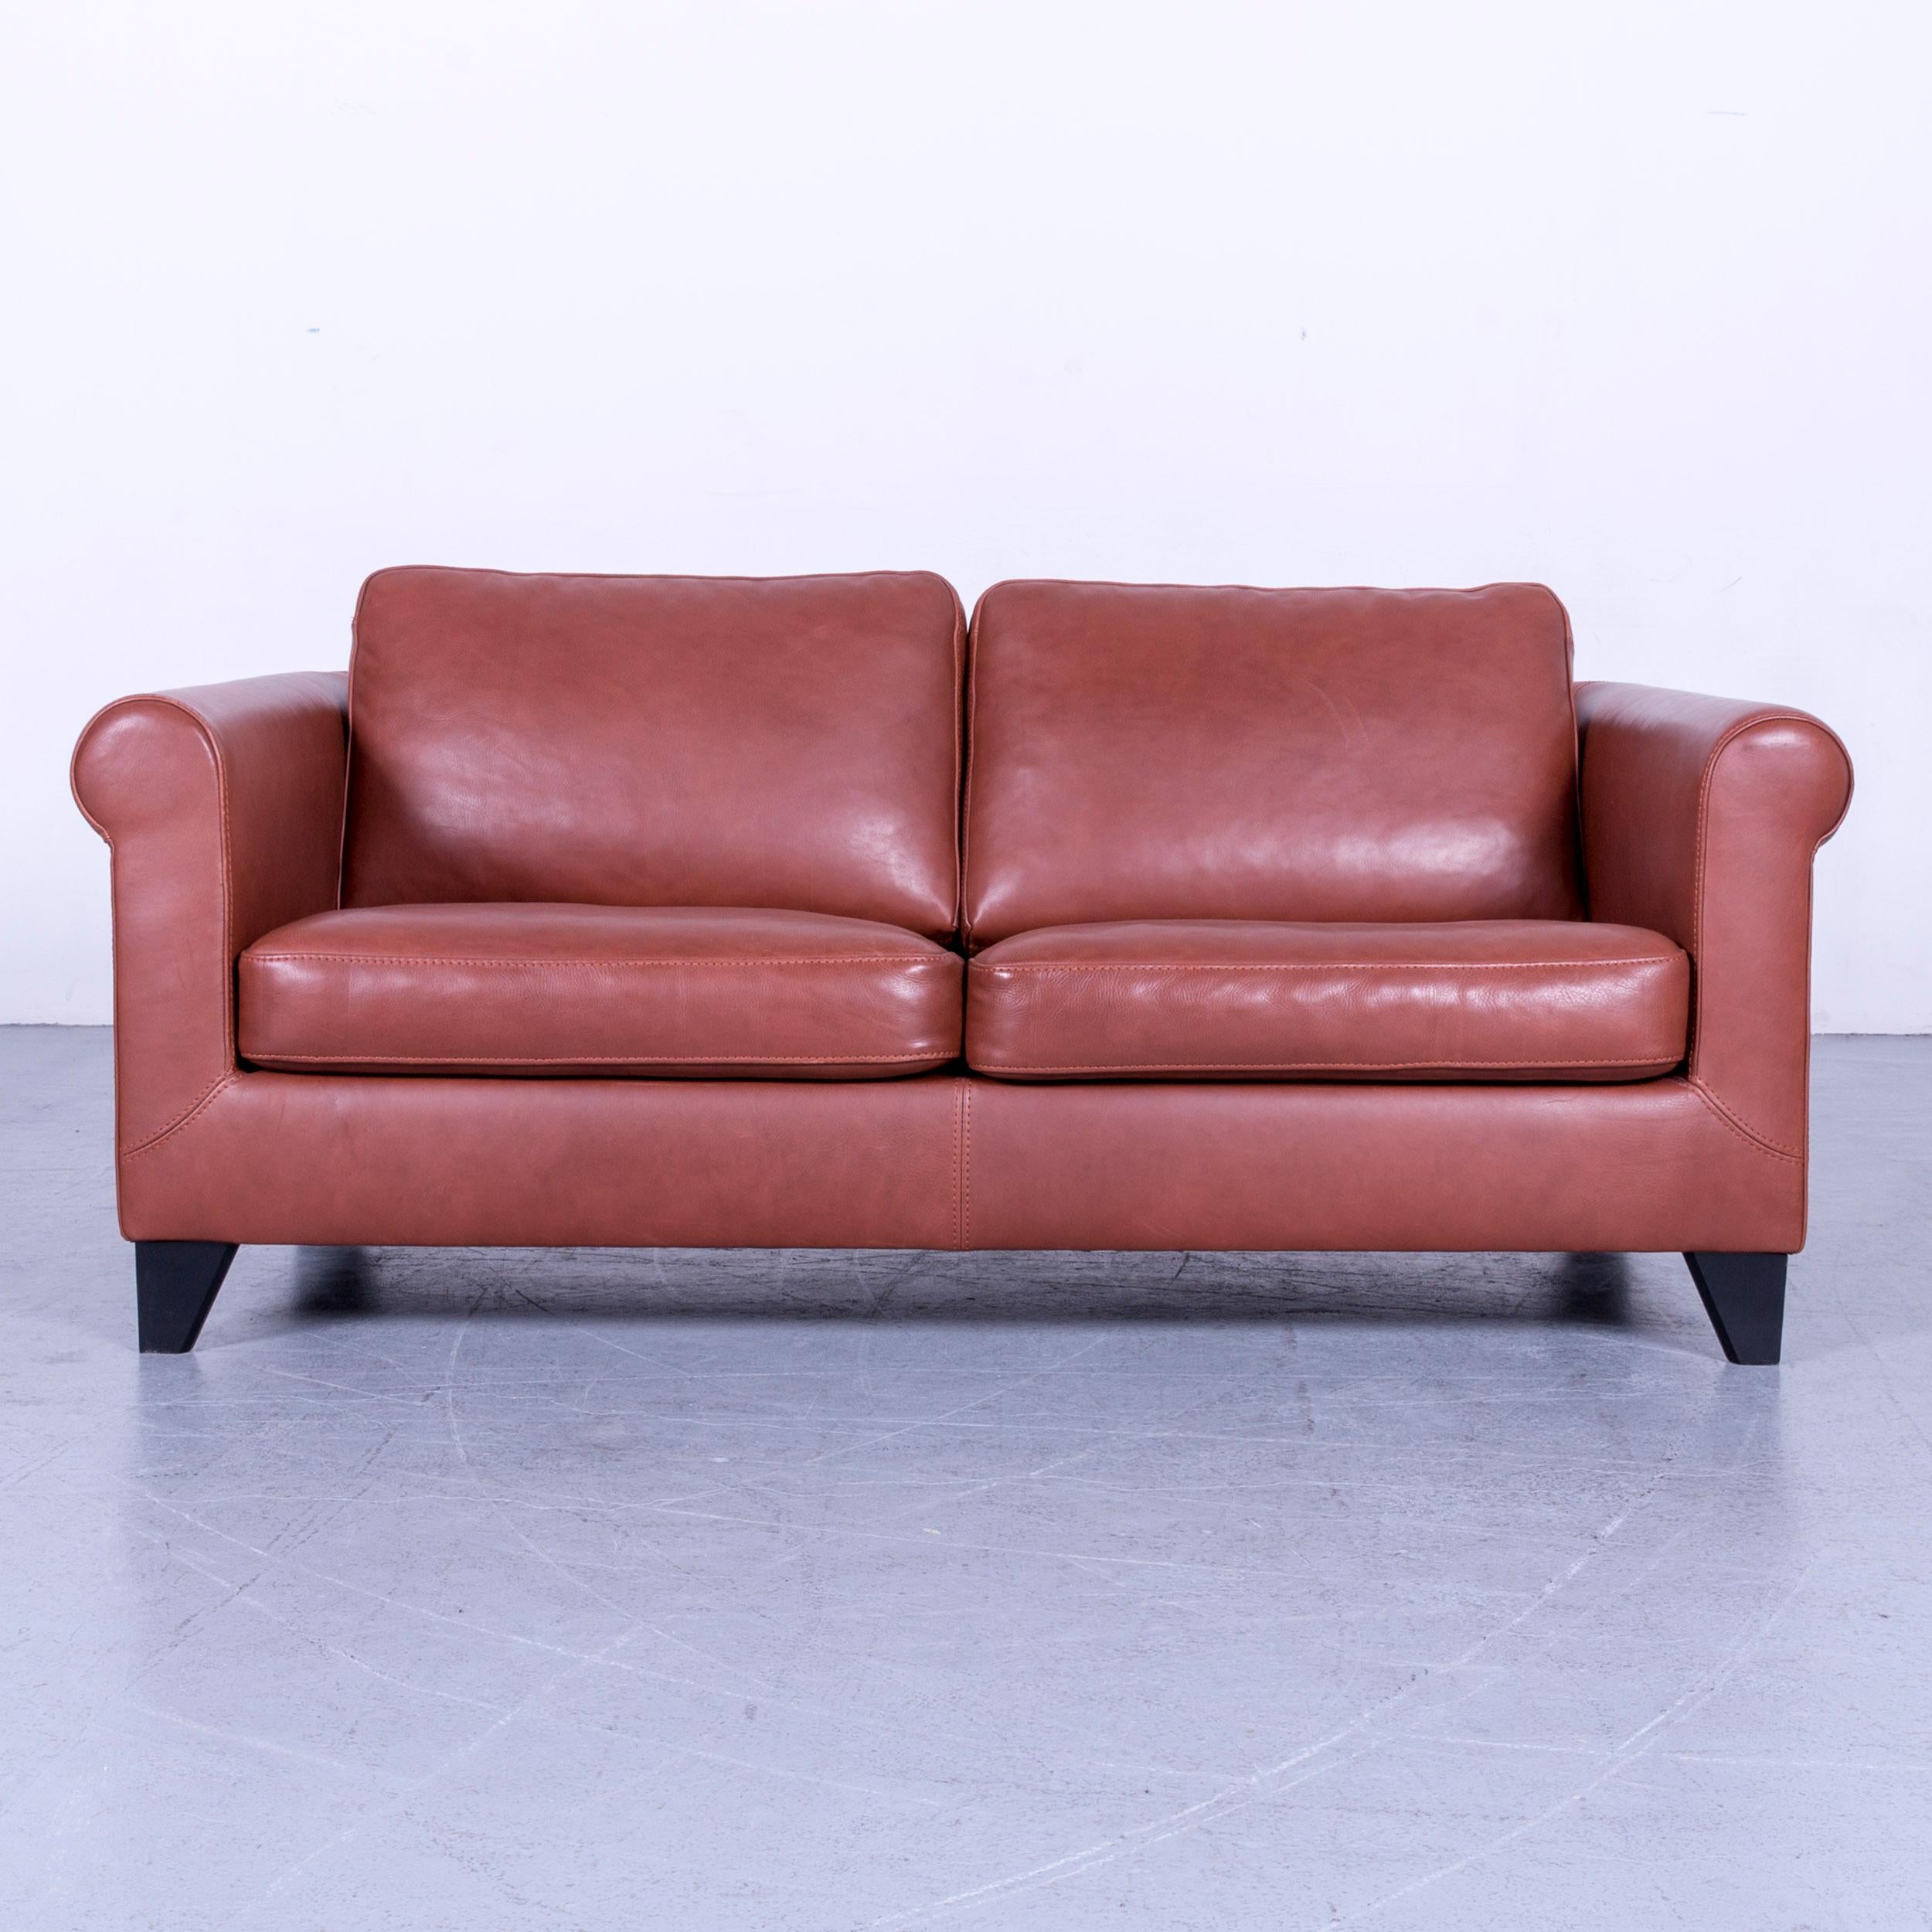 German Machalke Designer Leather Sofa Red Two-Seat Couch Set